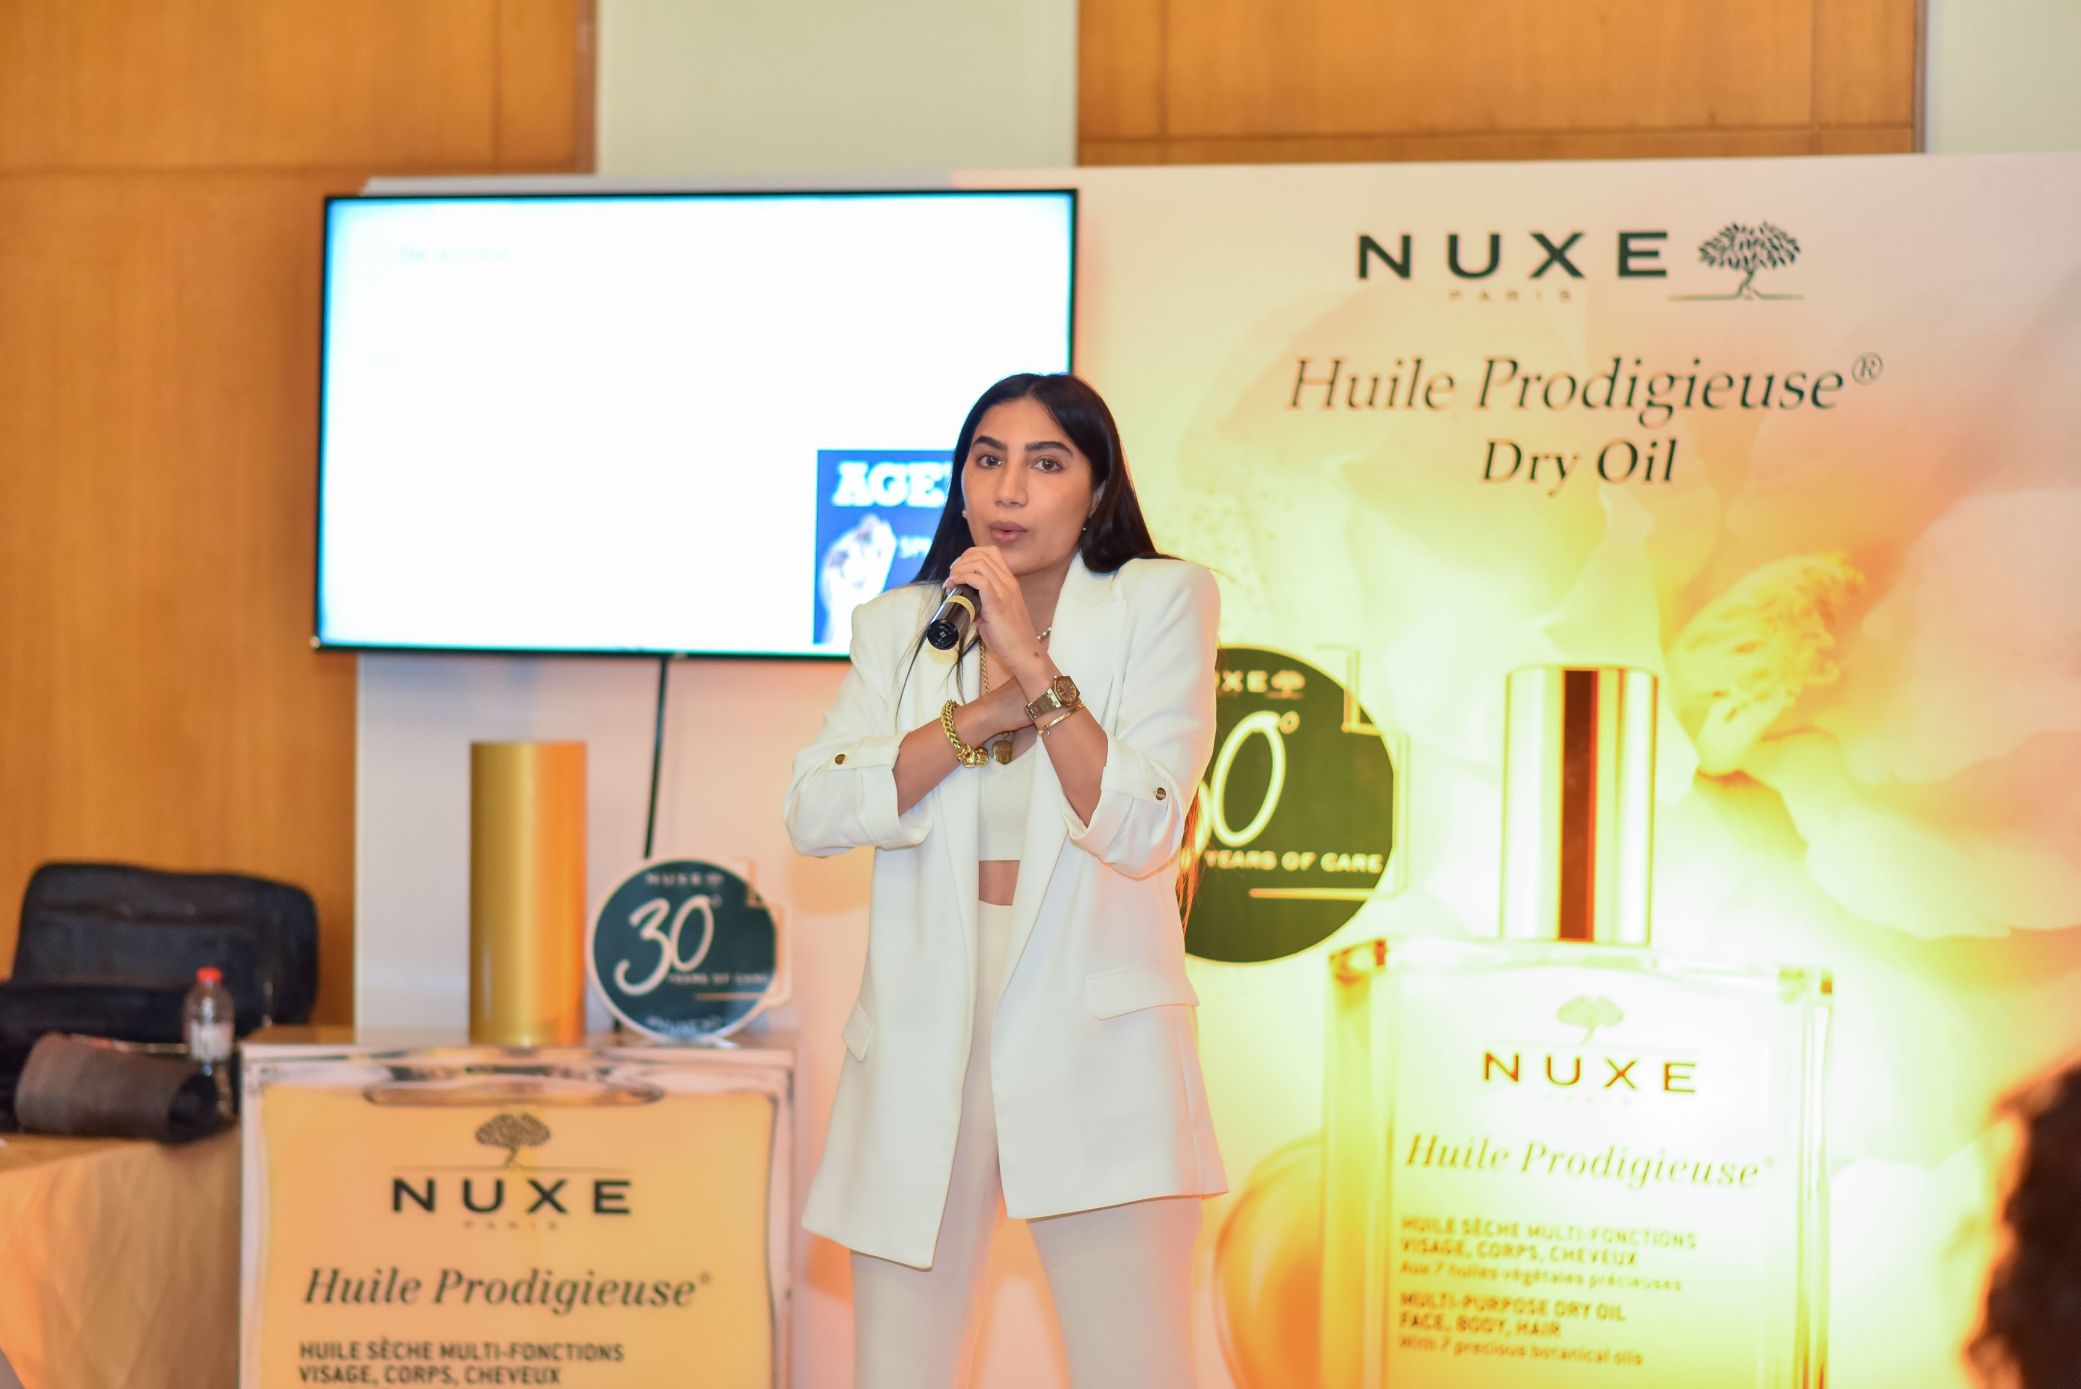 NUXE DRY OIL